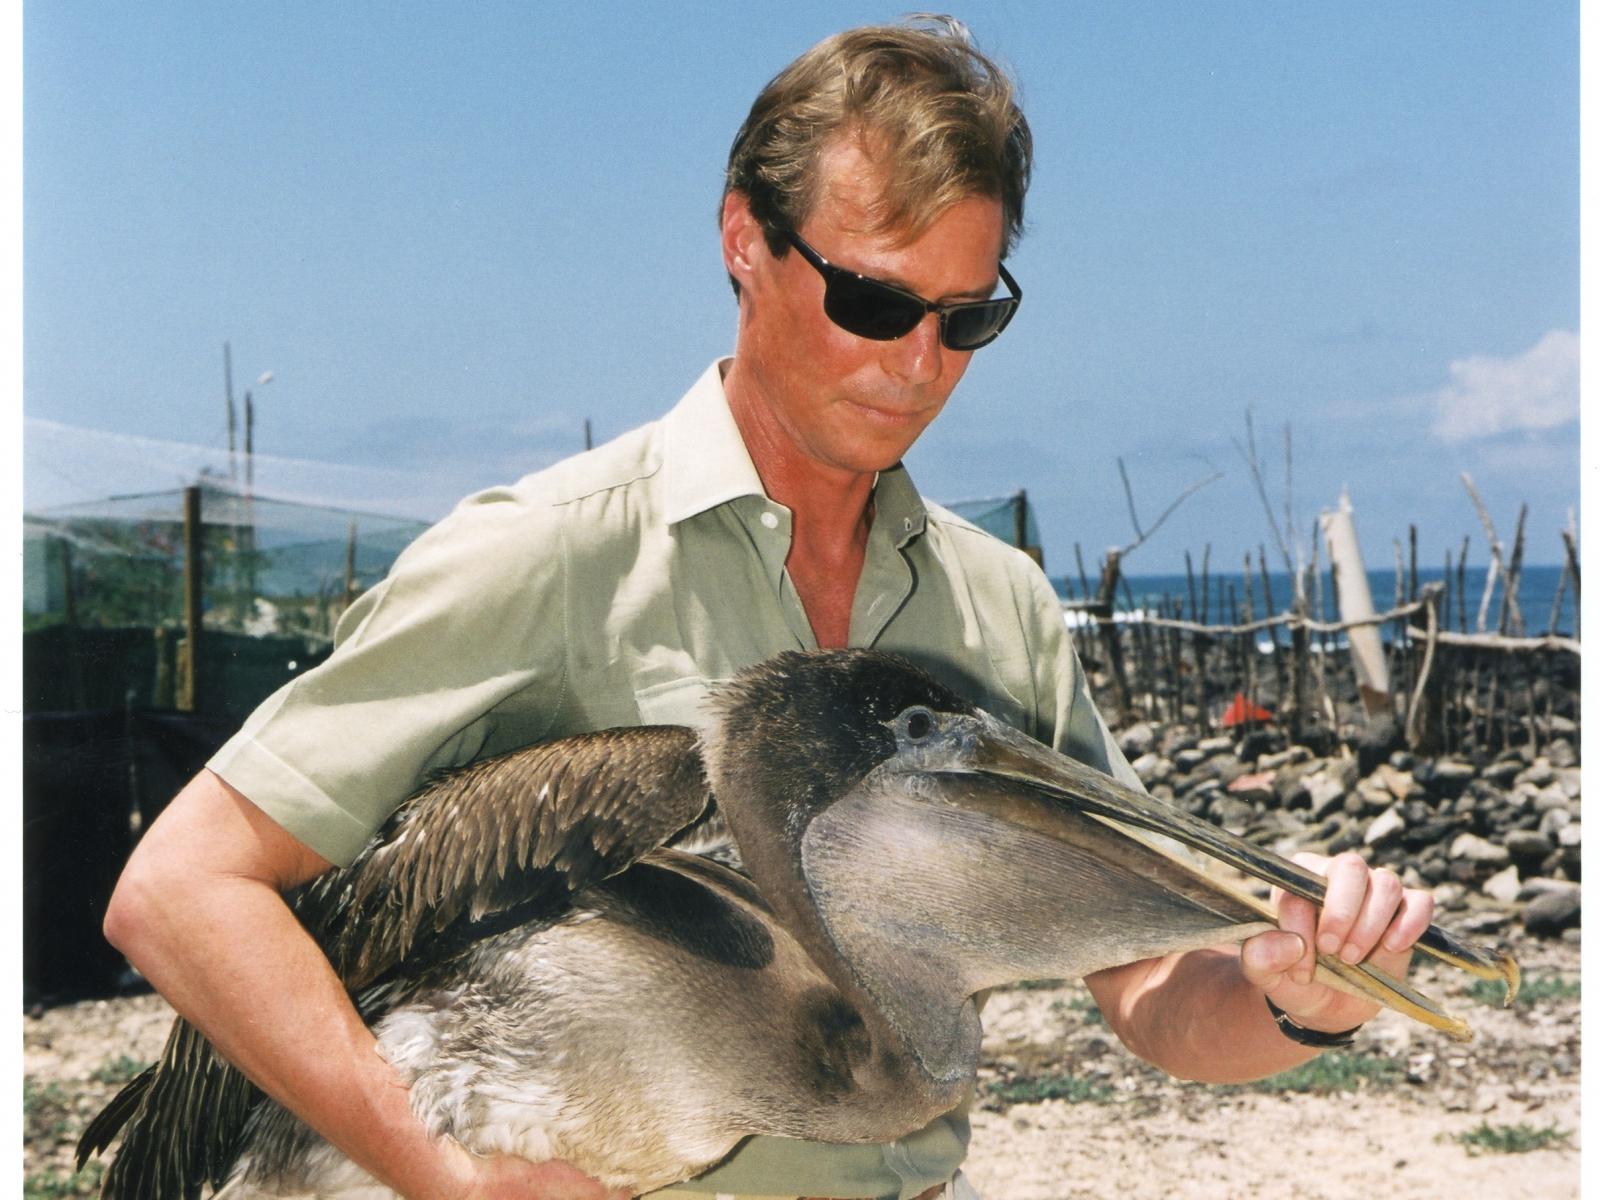 The Grand Duke with a pelican